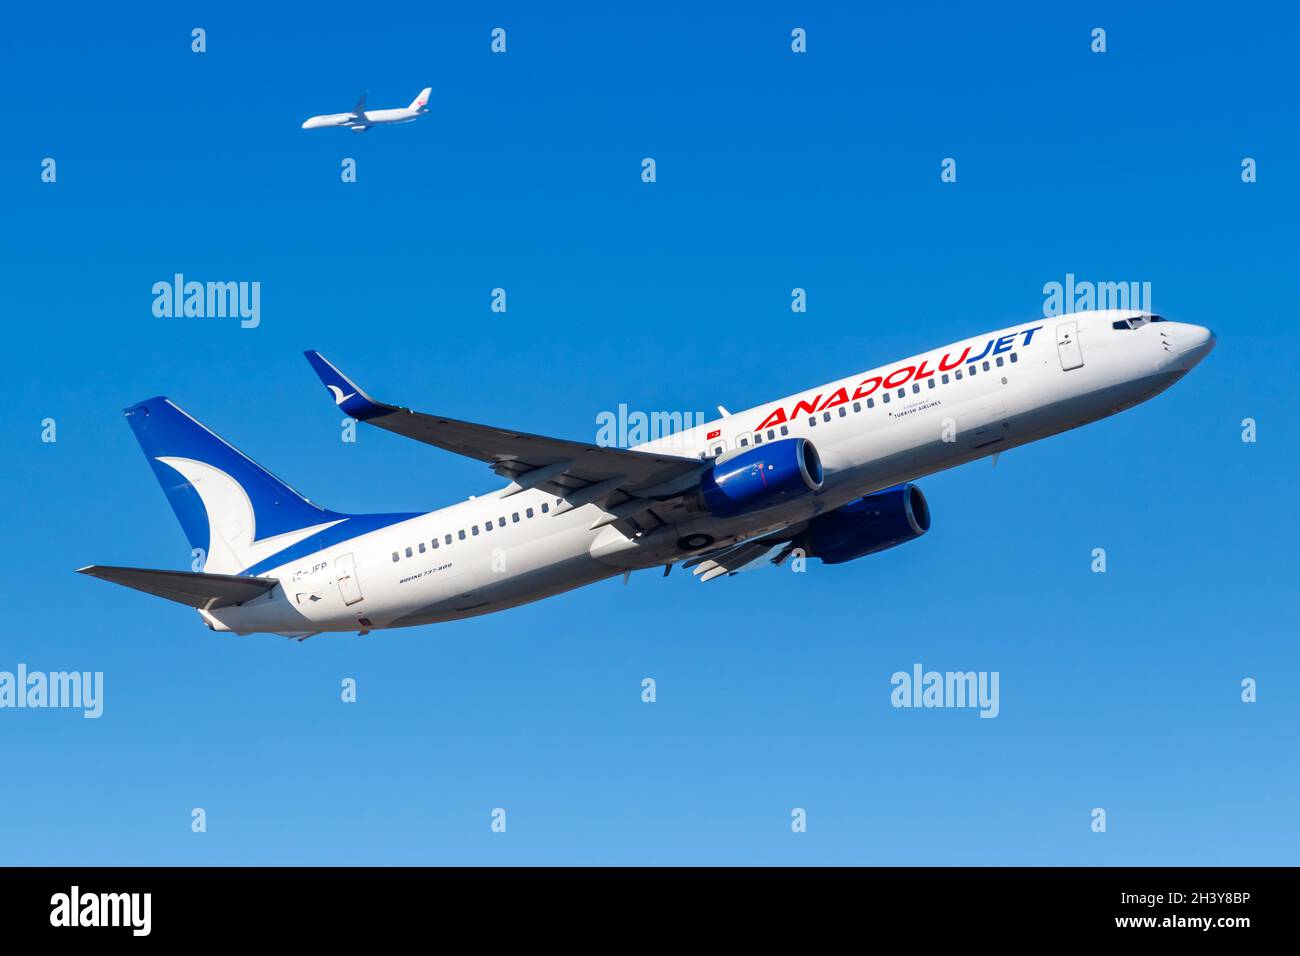 AnadoluJet Boeing 737-800 aircraft Frankfurt Airport in Germany Stock Photo